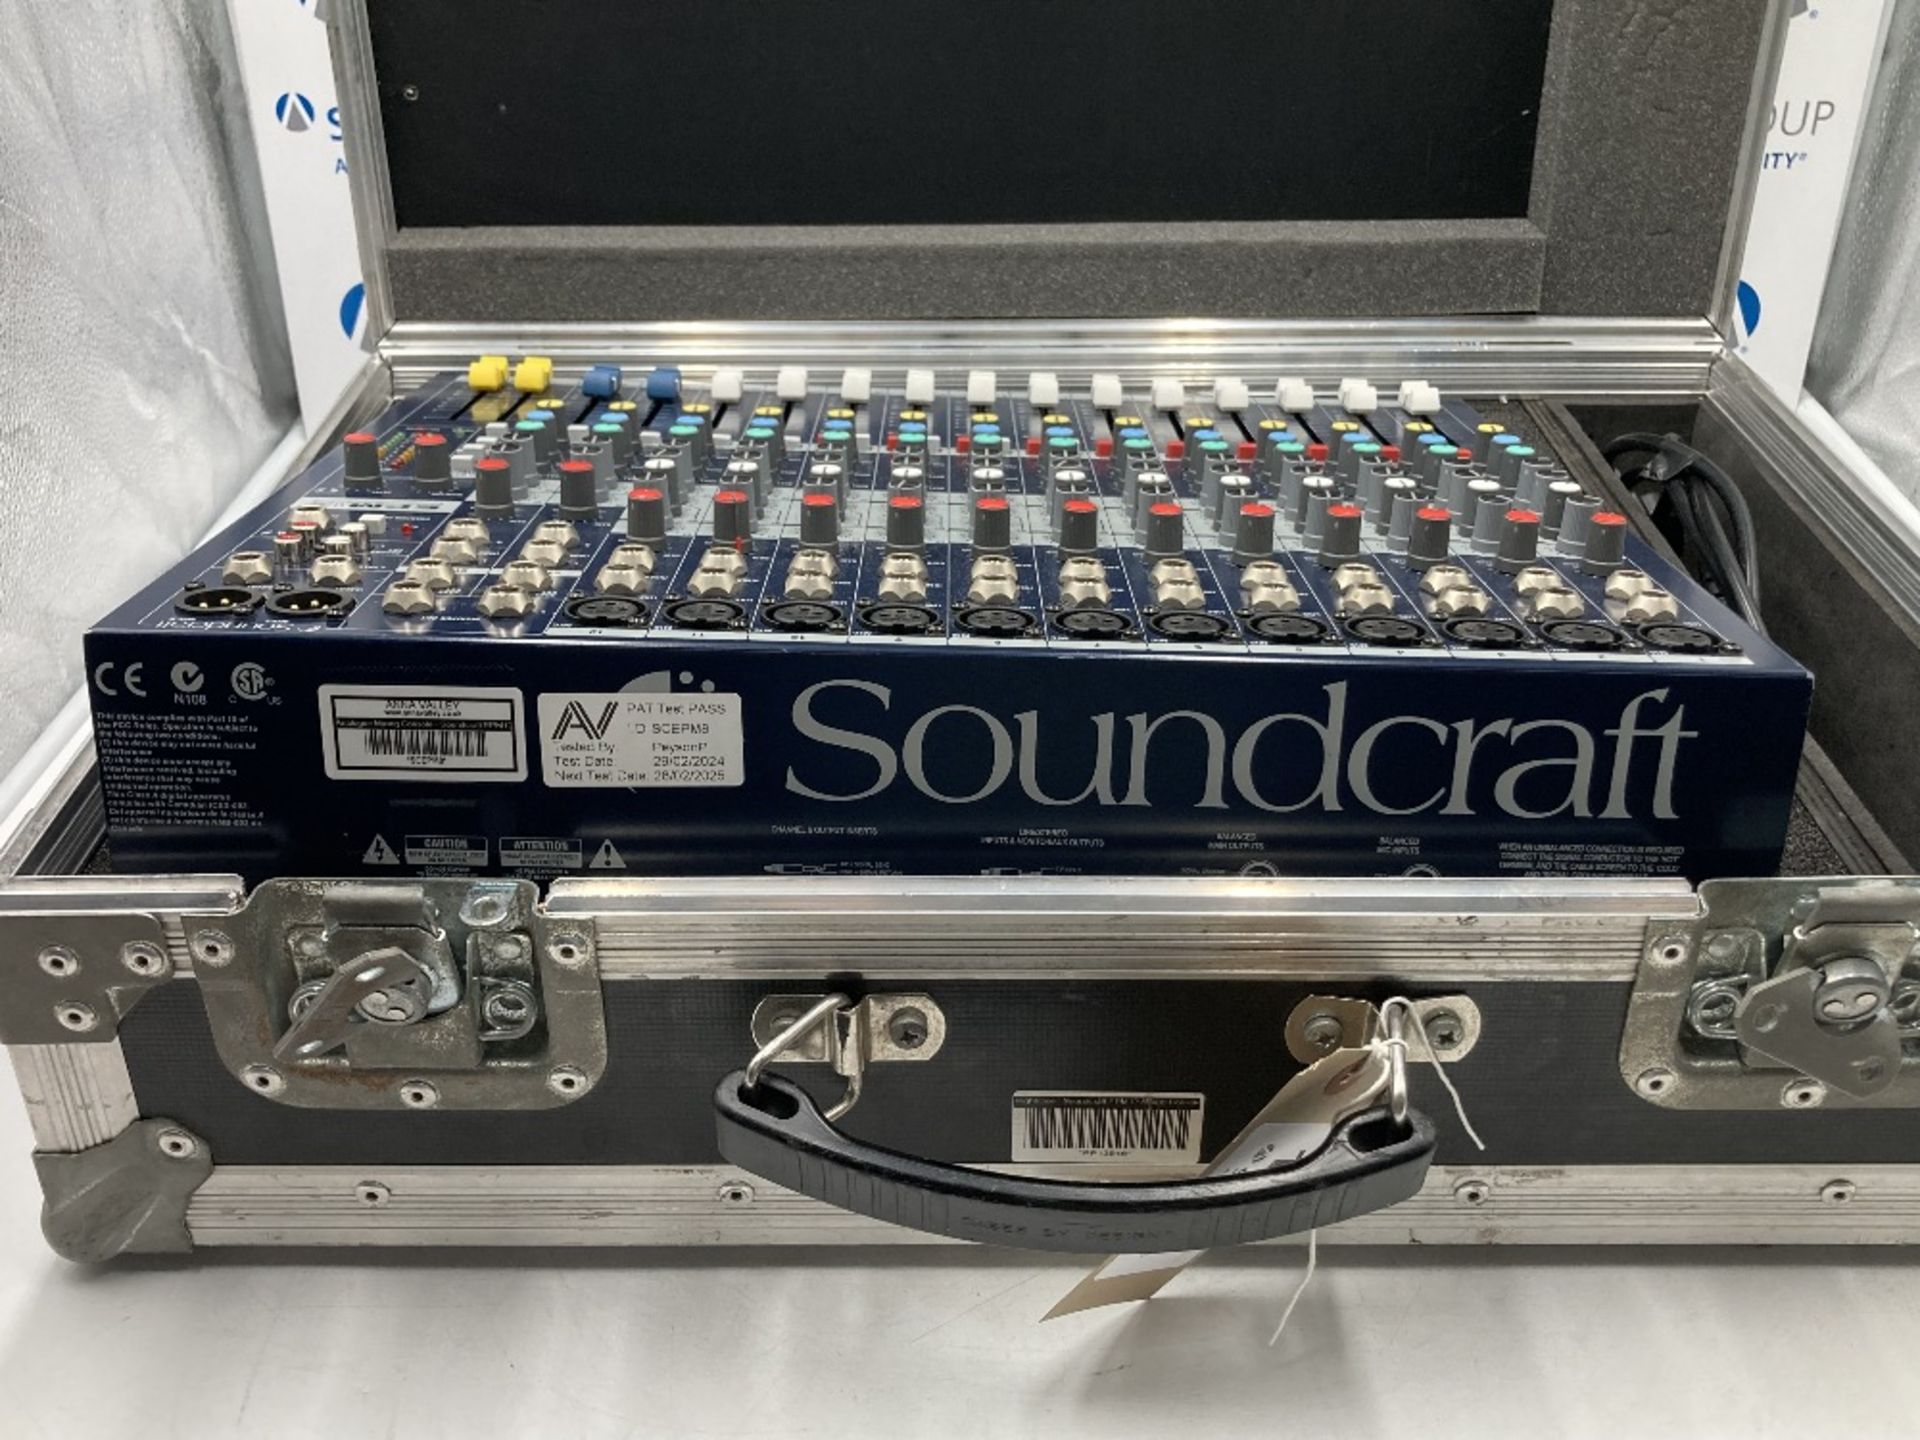 Soundcraft EPM12 Analogue Mixing Console & Heavy Duty Briefcase - Image 5 of 10